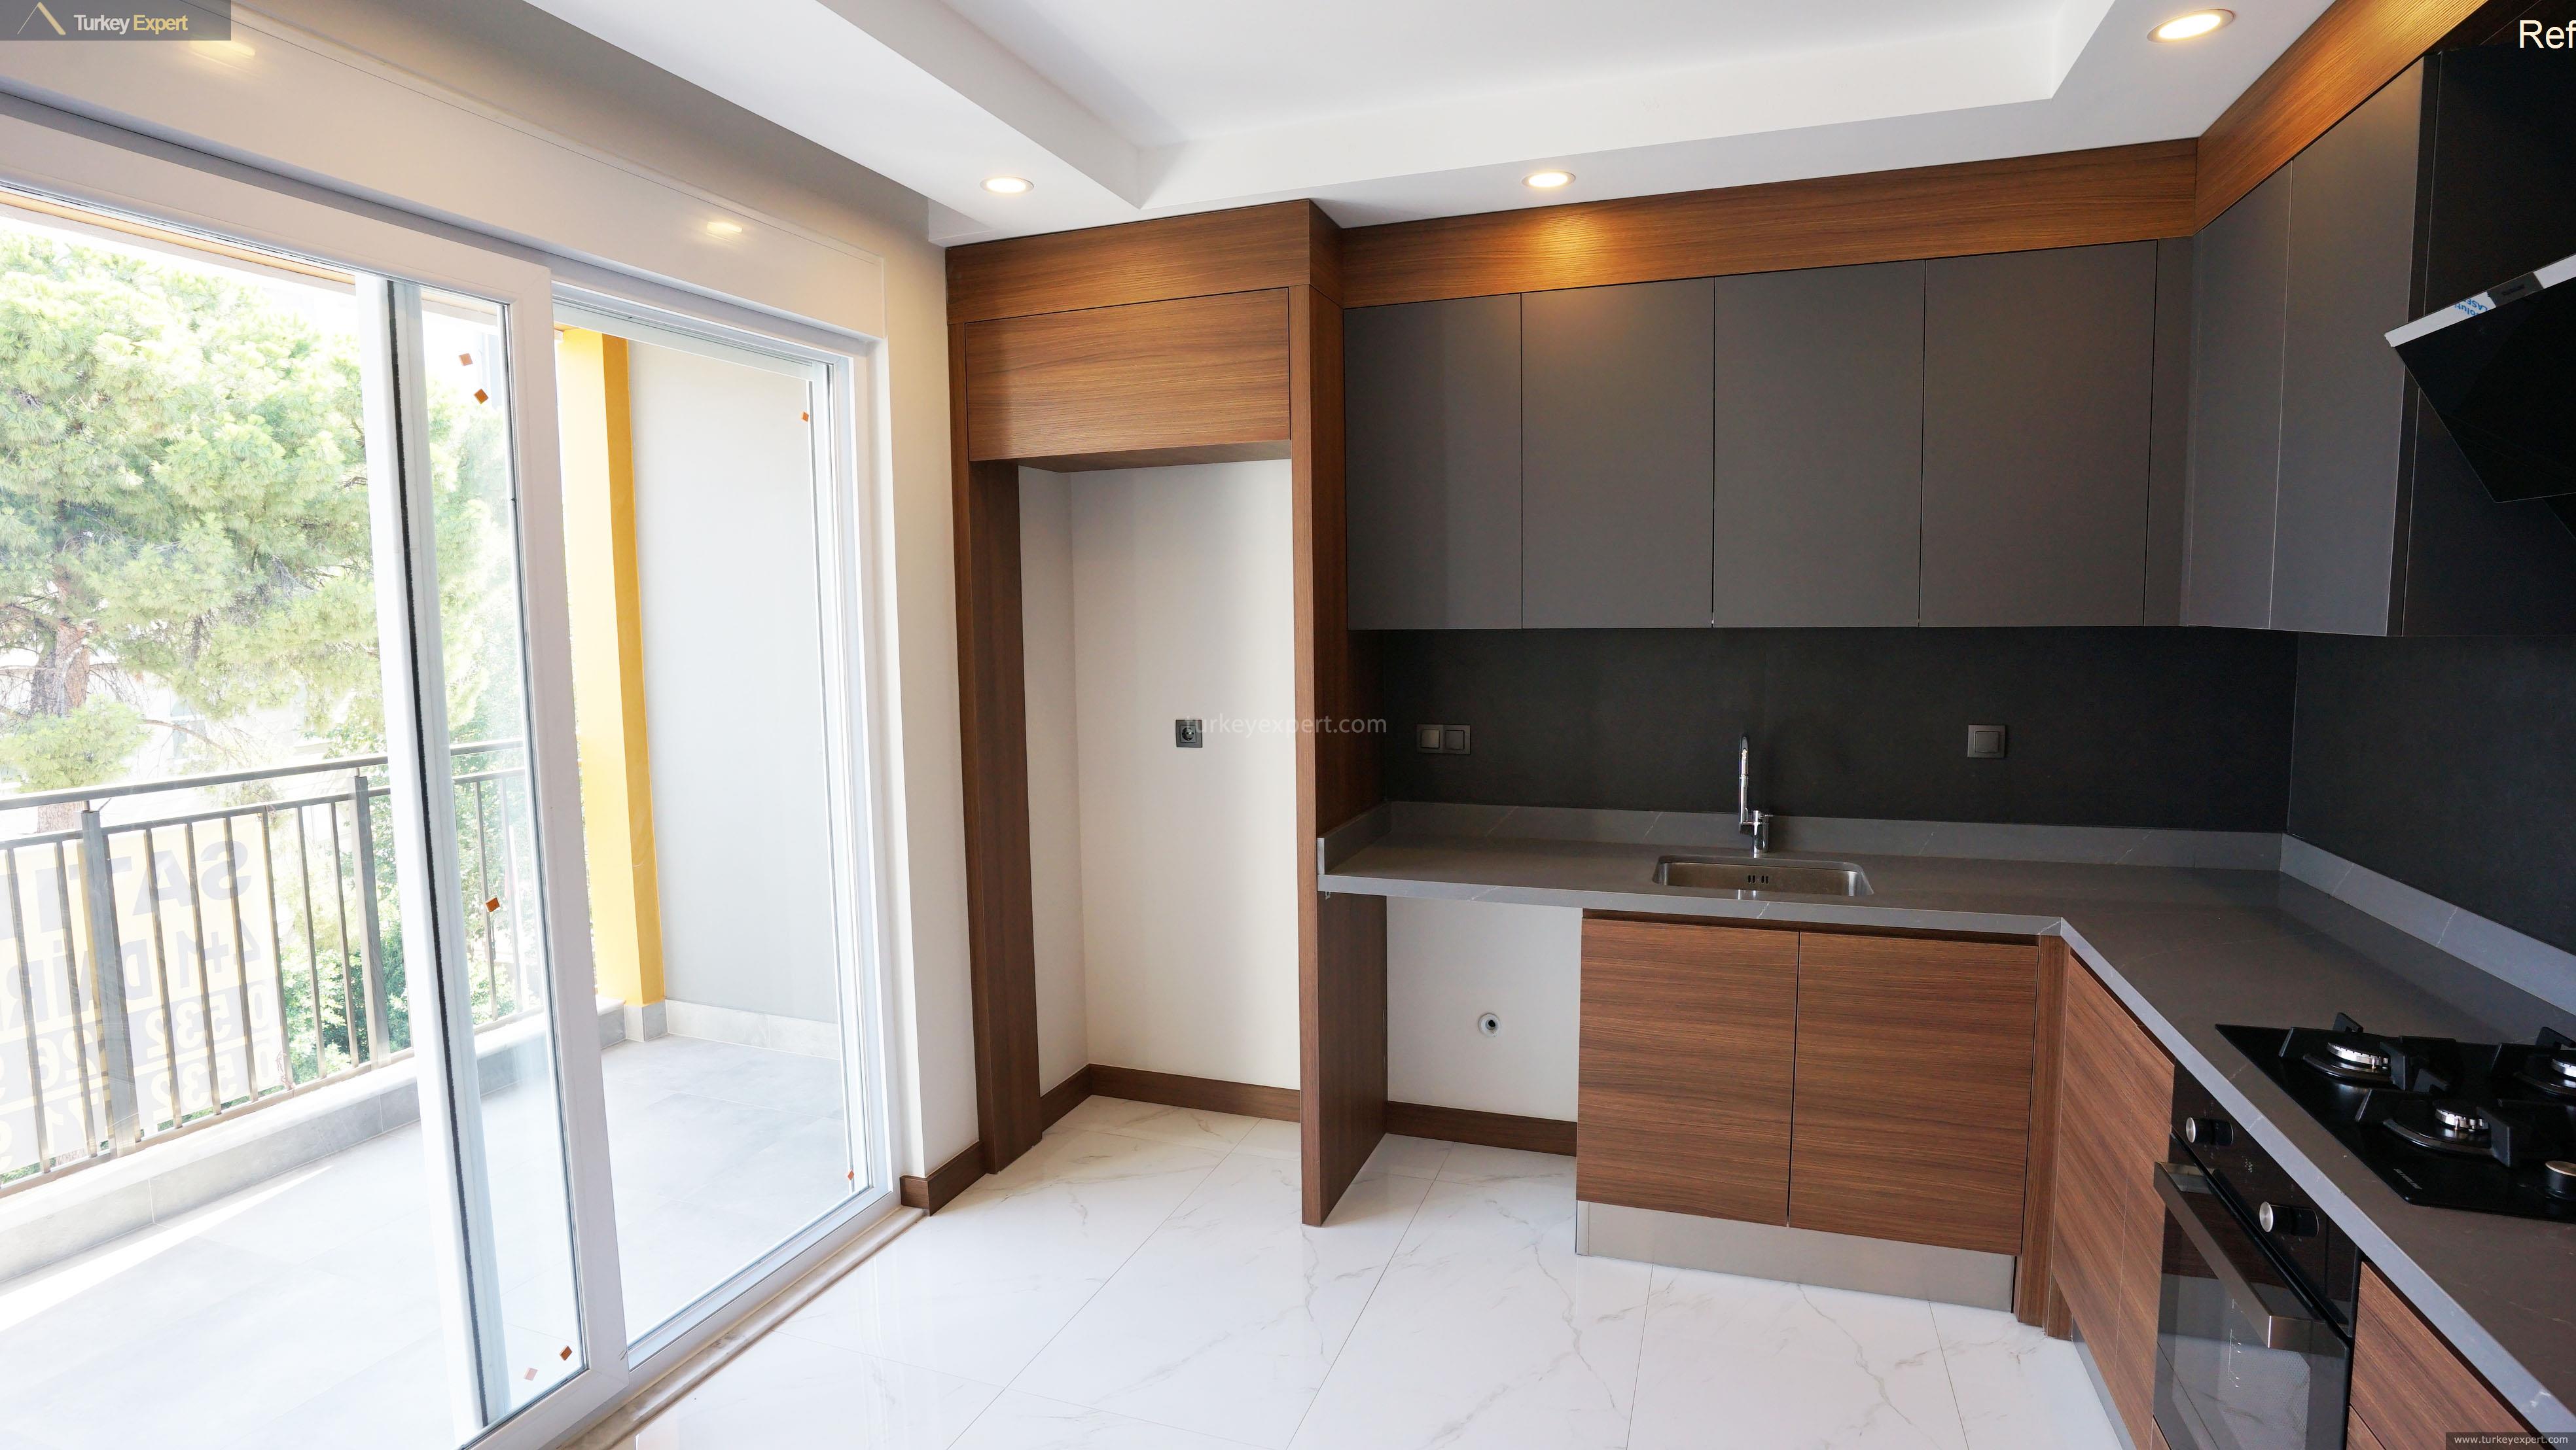 Comfortable 4-bedroom apartments in Antalya central location 2